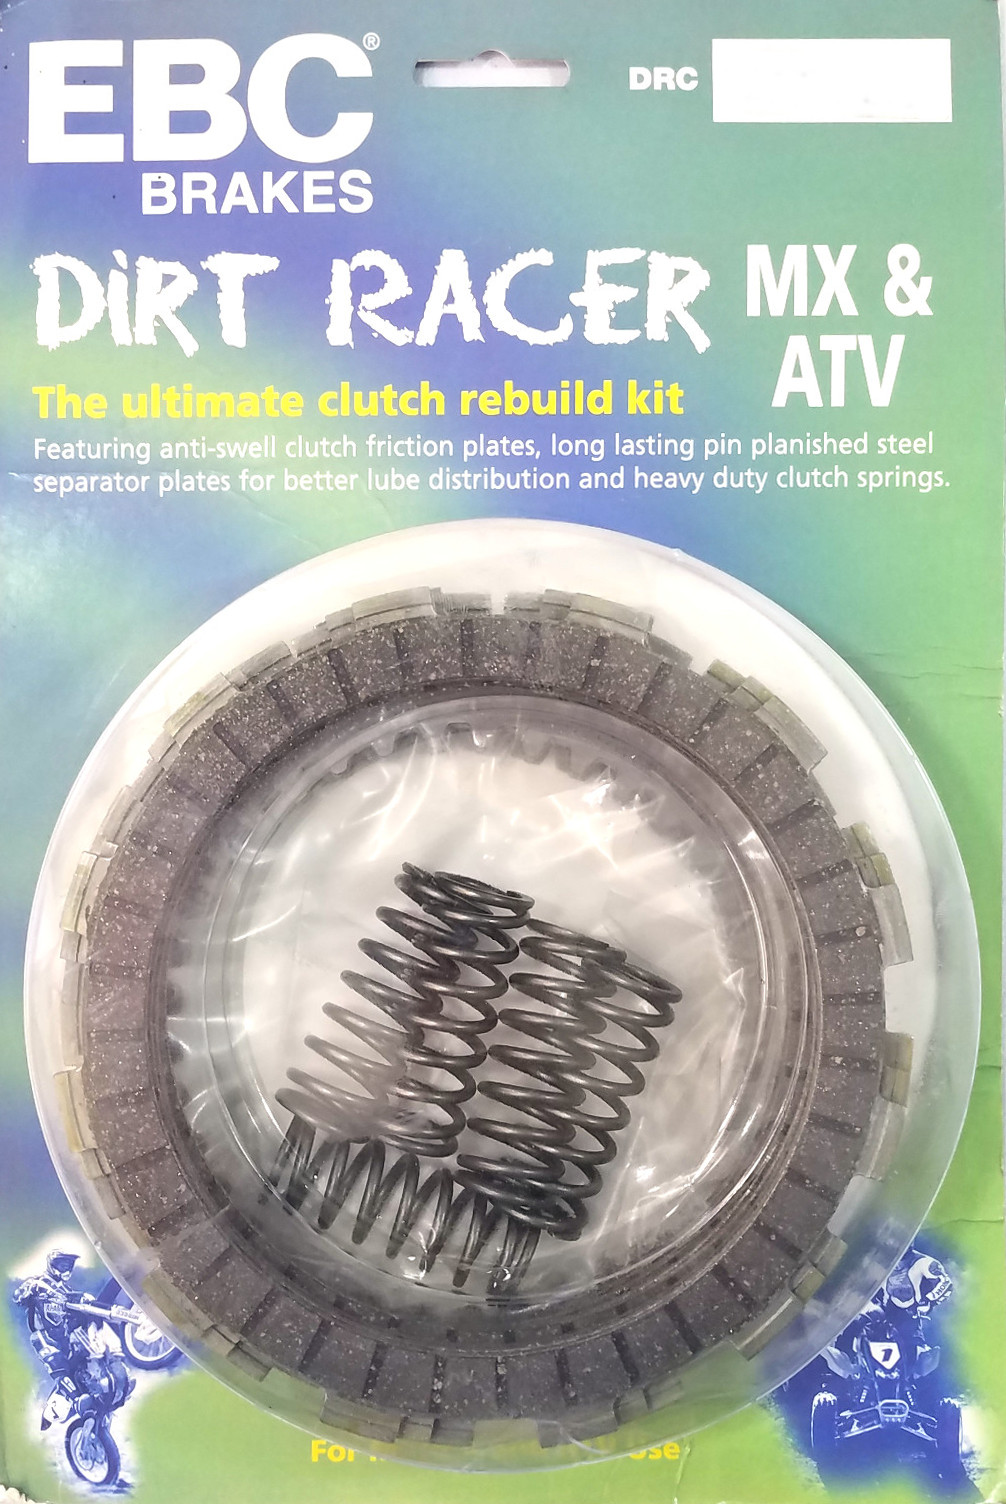 DRC Complete Clutch Kit - Cork CK Plates, Steels, & Springs - For 86-87 Suzuki RM125 - Click Image to Close